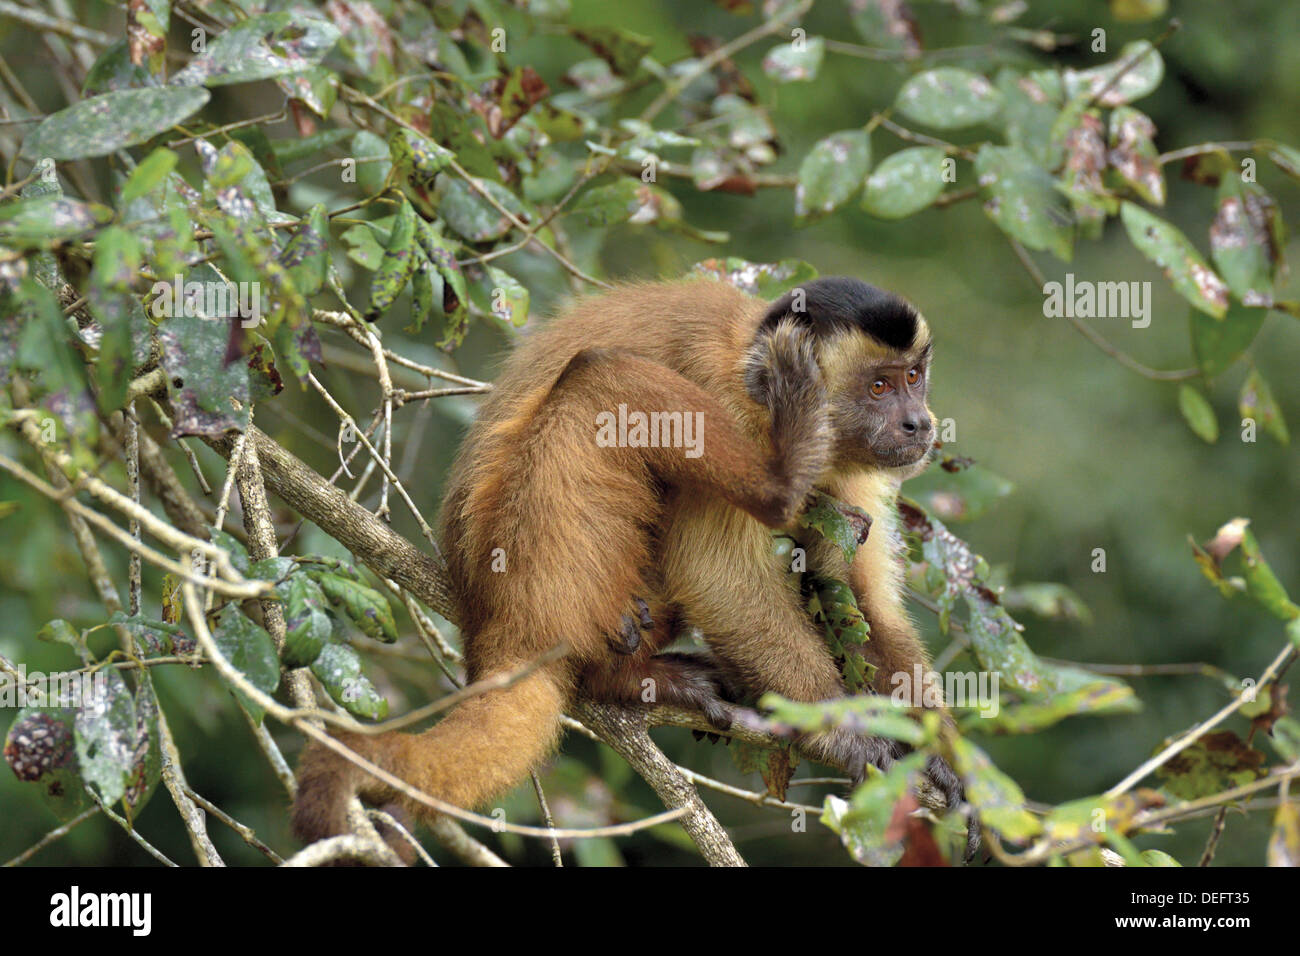 Kratzt High Resolution Stock Photography and Images - Alamy